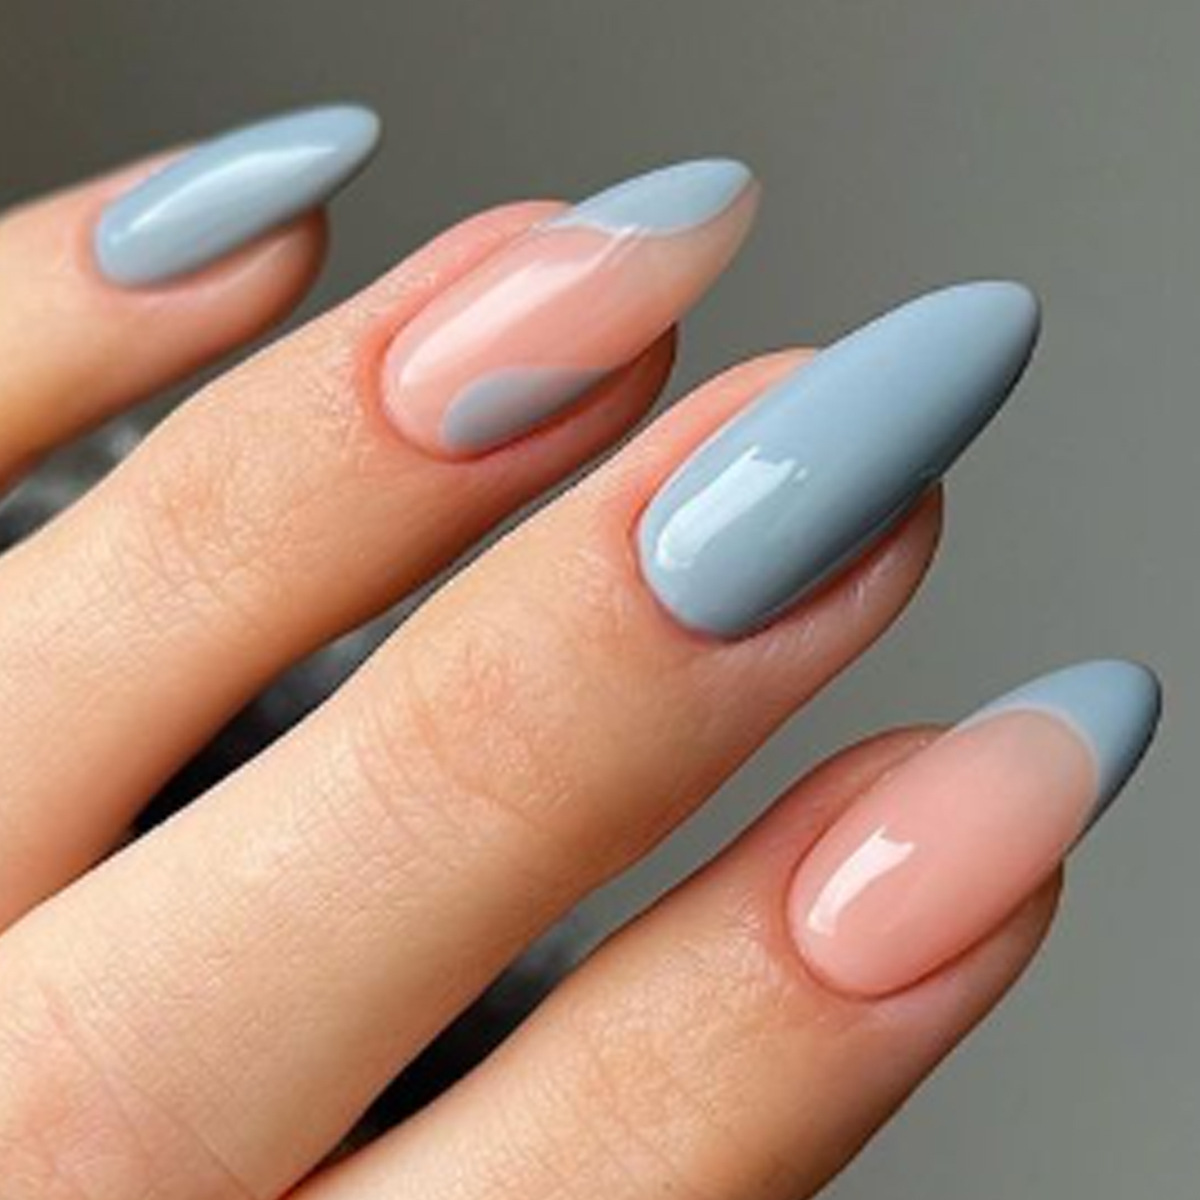 Can They Change the Shape of Your Natural Nails?